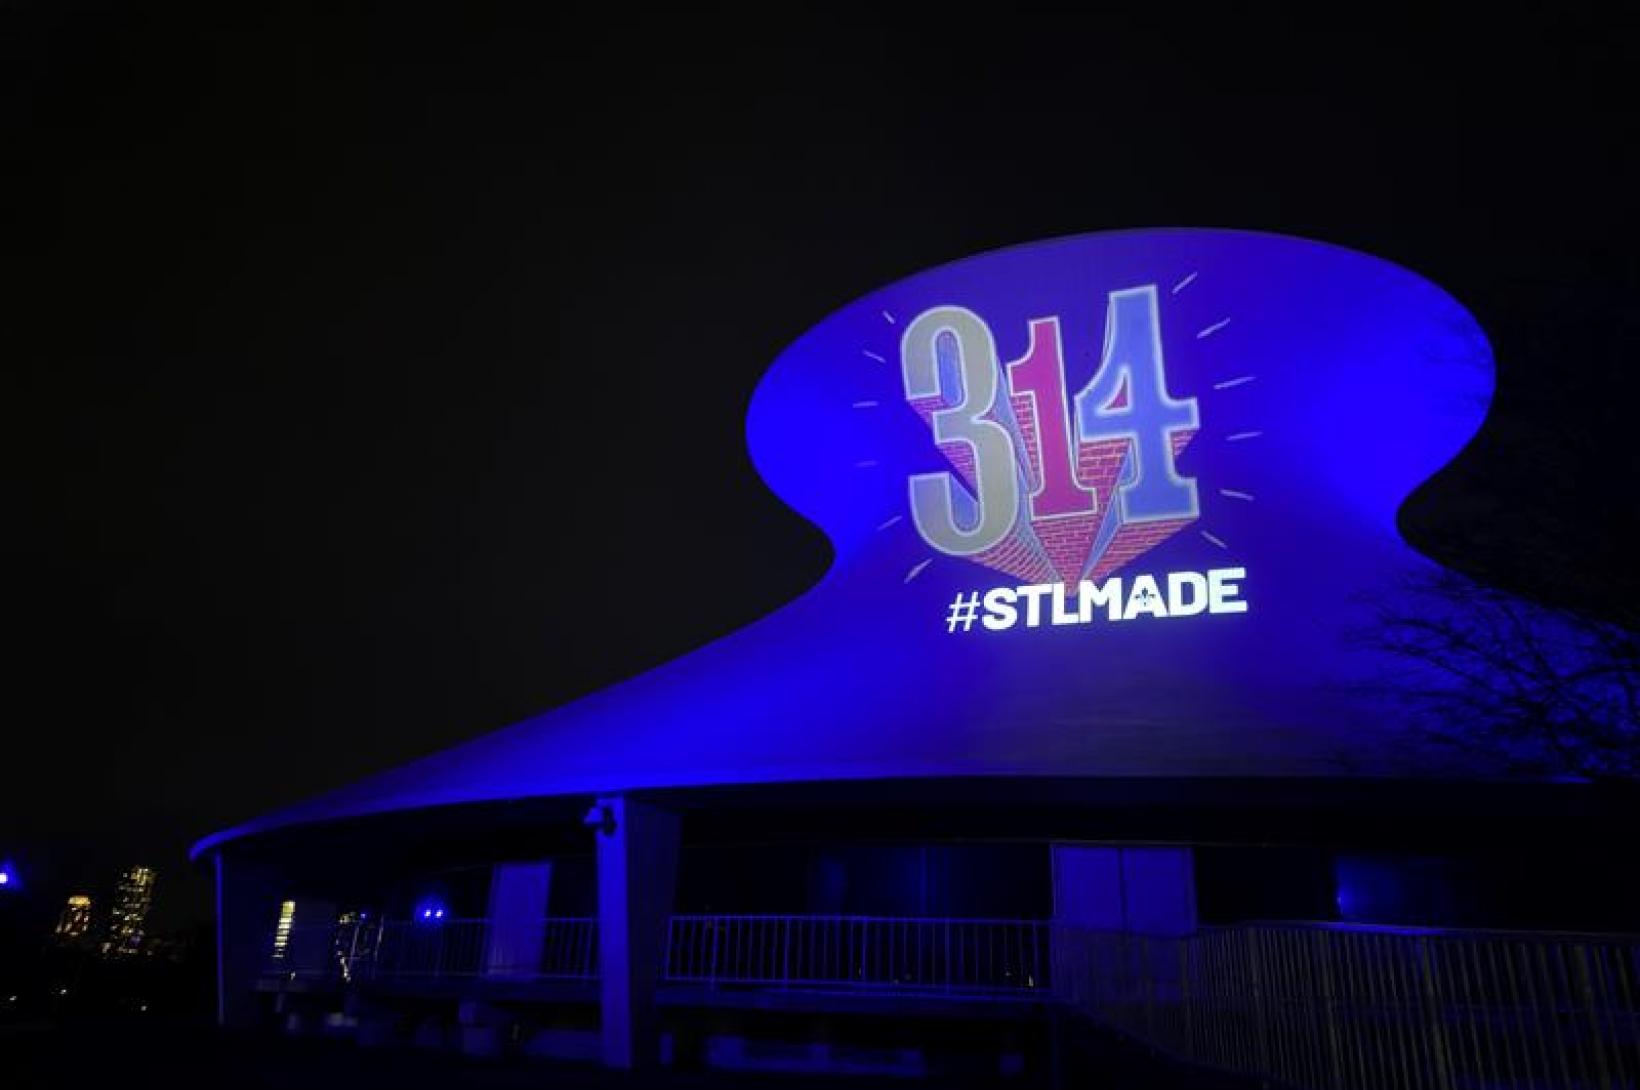 Set against a dark night sky, the Planetarium is illuminated with the 314 day logo on 314 Day 2023.